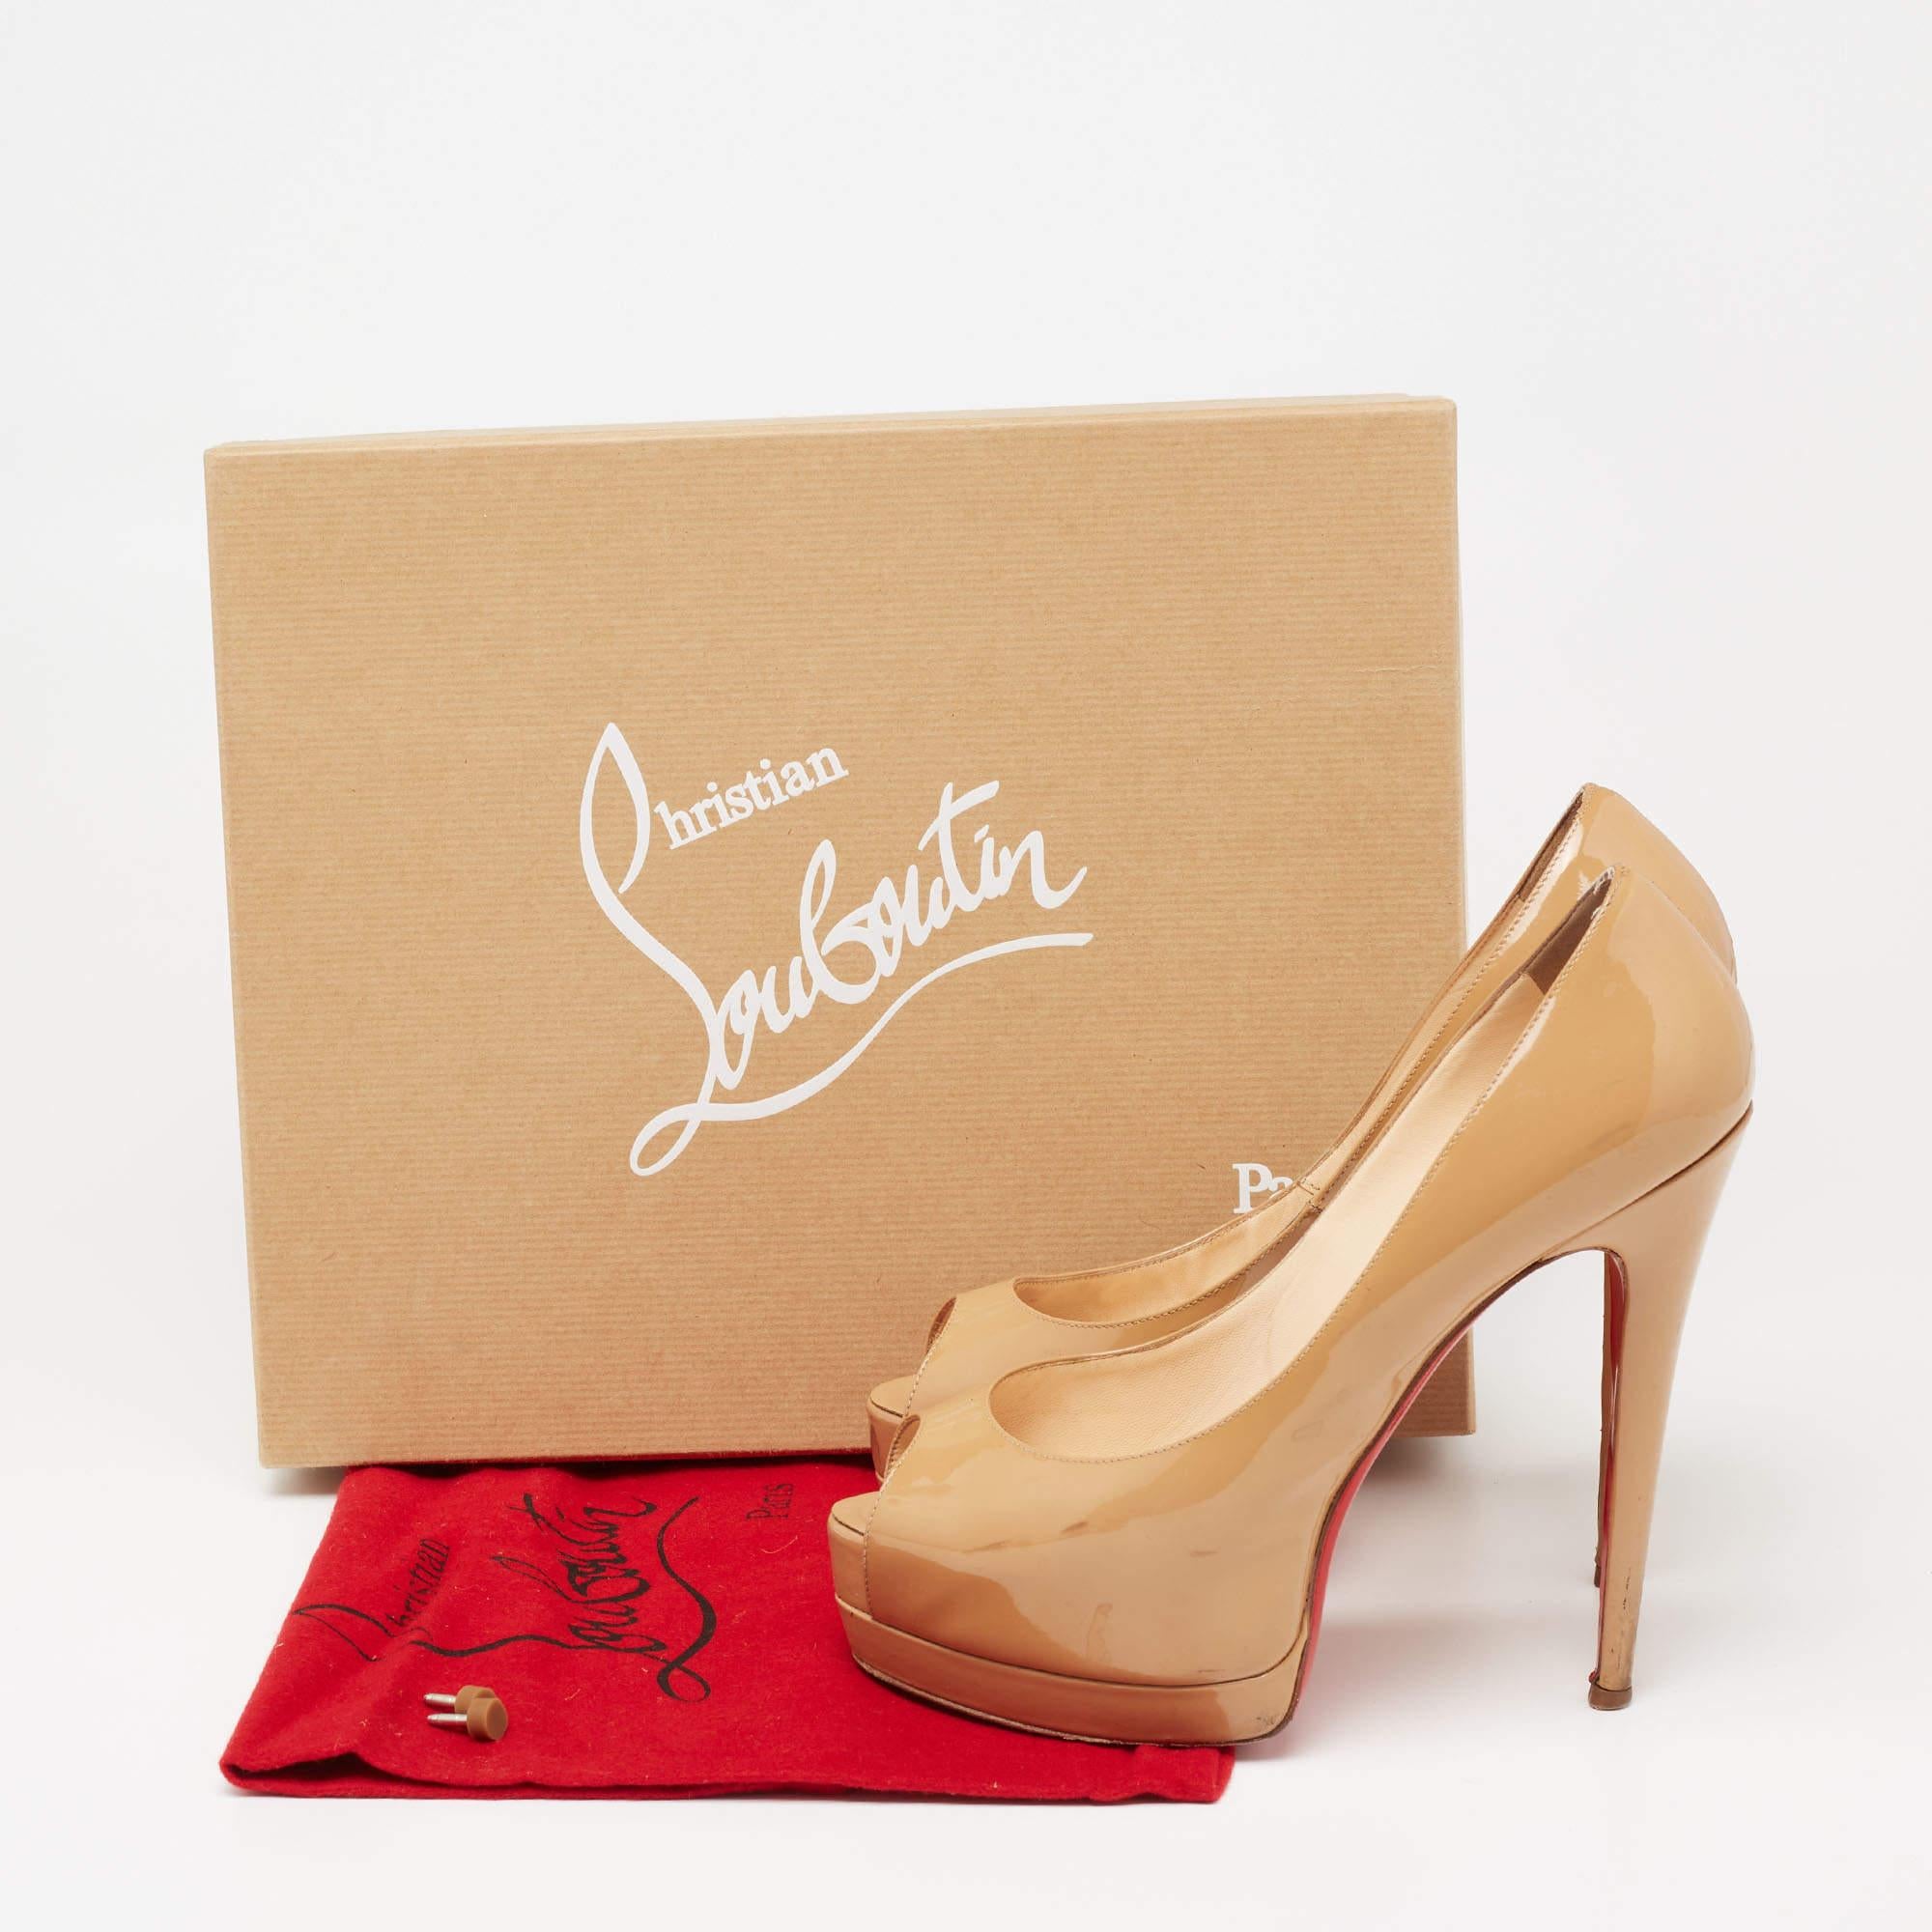 Christian Louboutin Beige Patent Leather New Prive Platform Pumps Size 38.5 For Sale 5